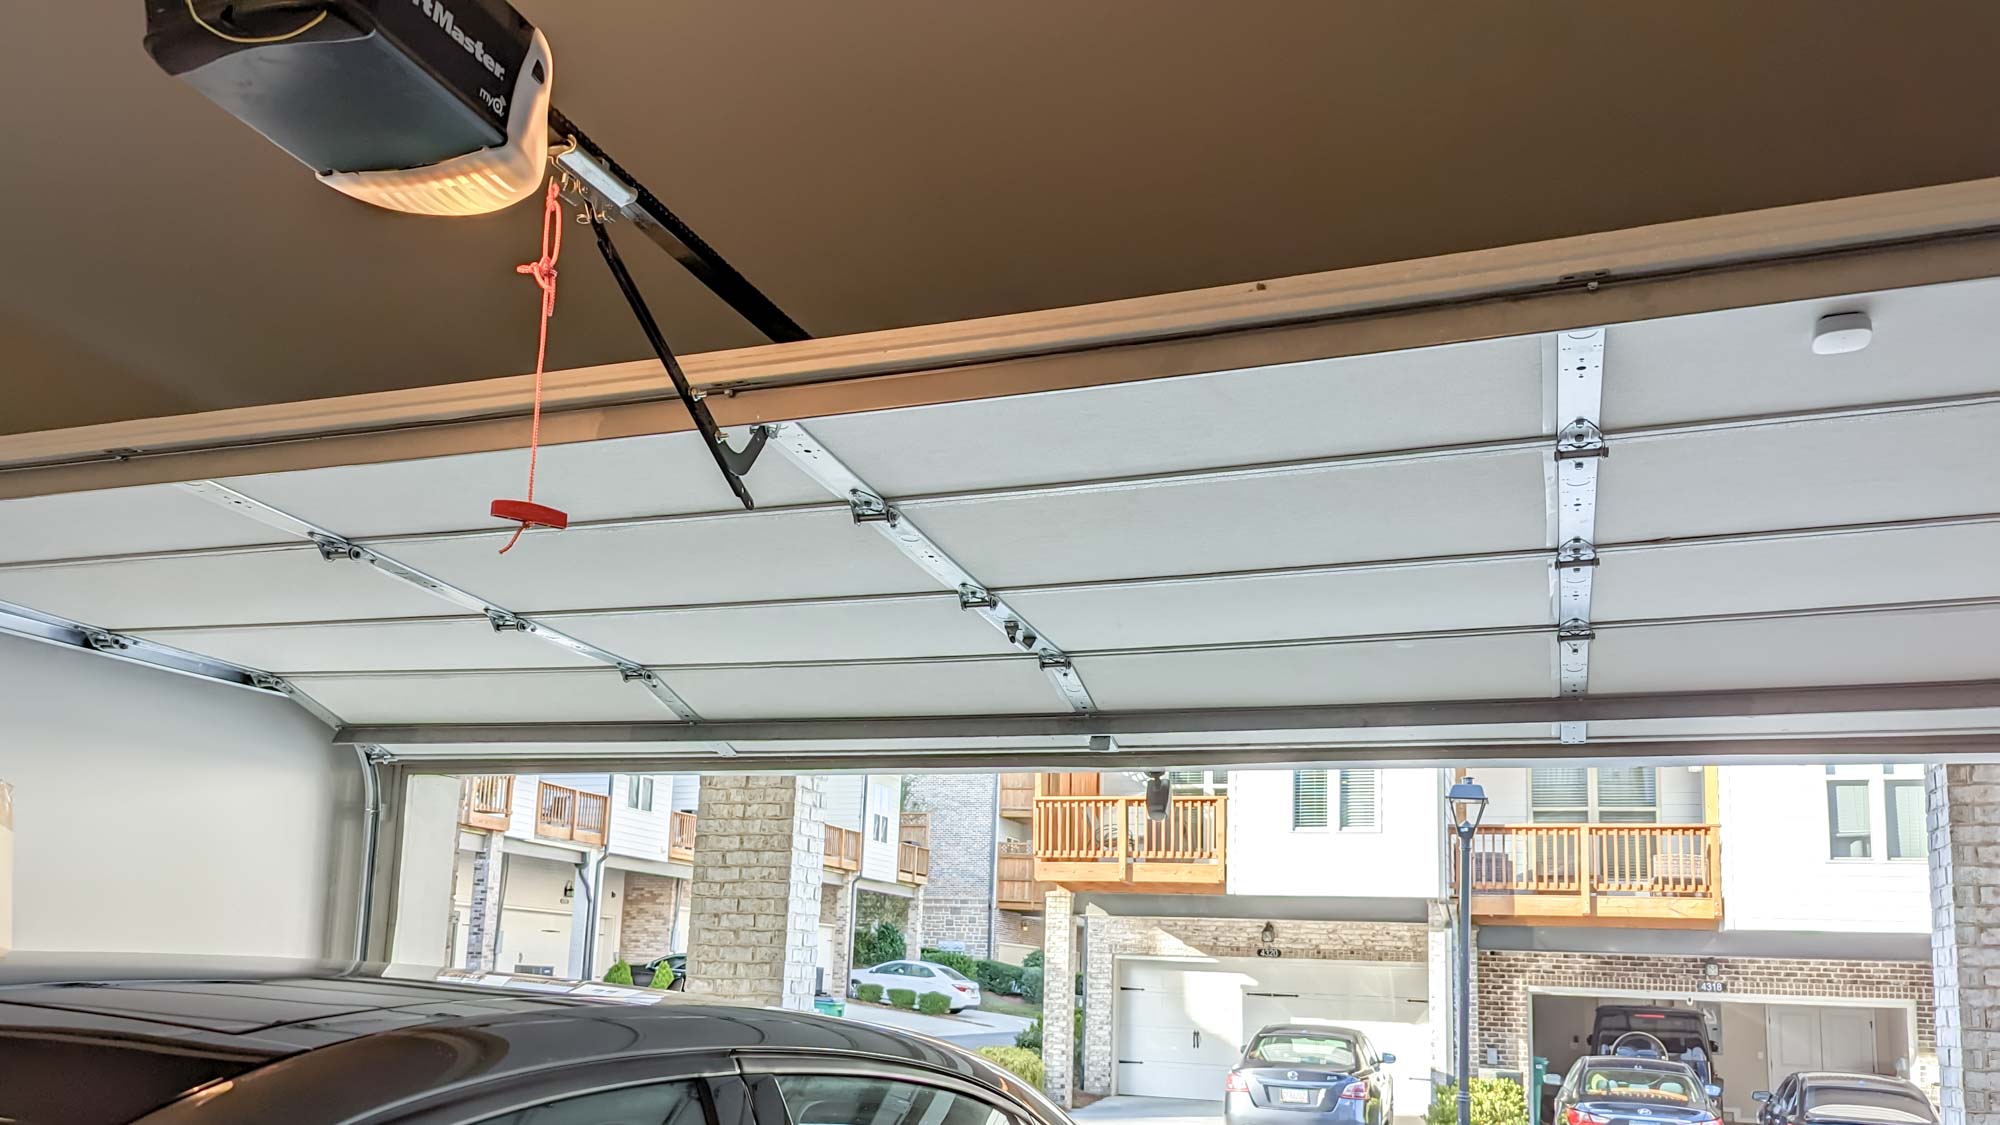 Picture of an open garage door with a car parked inside